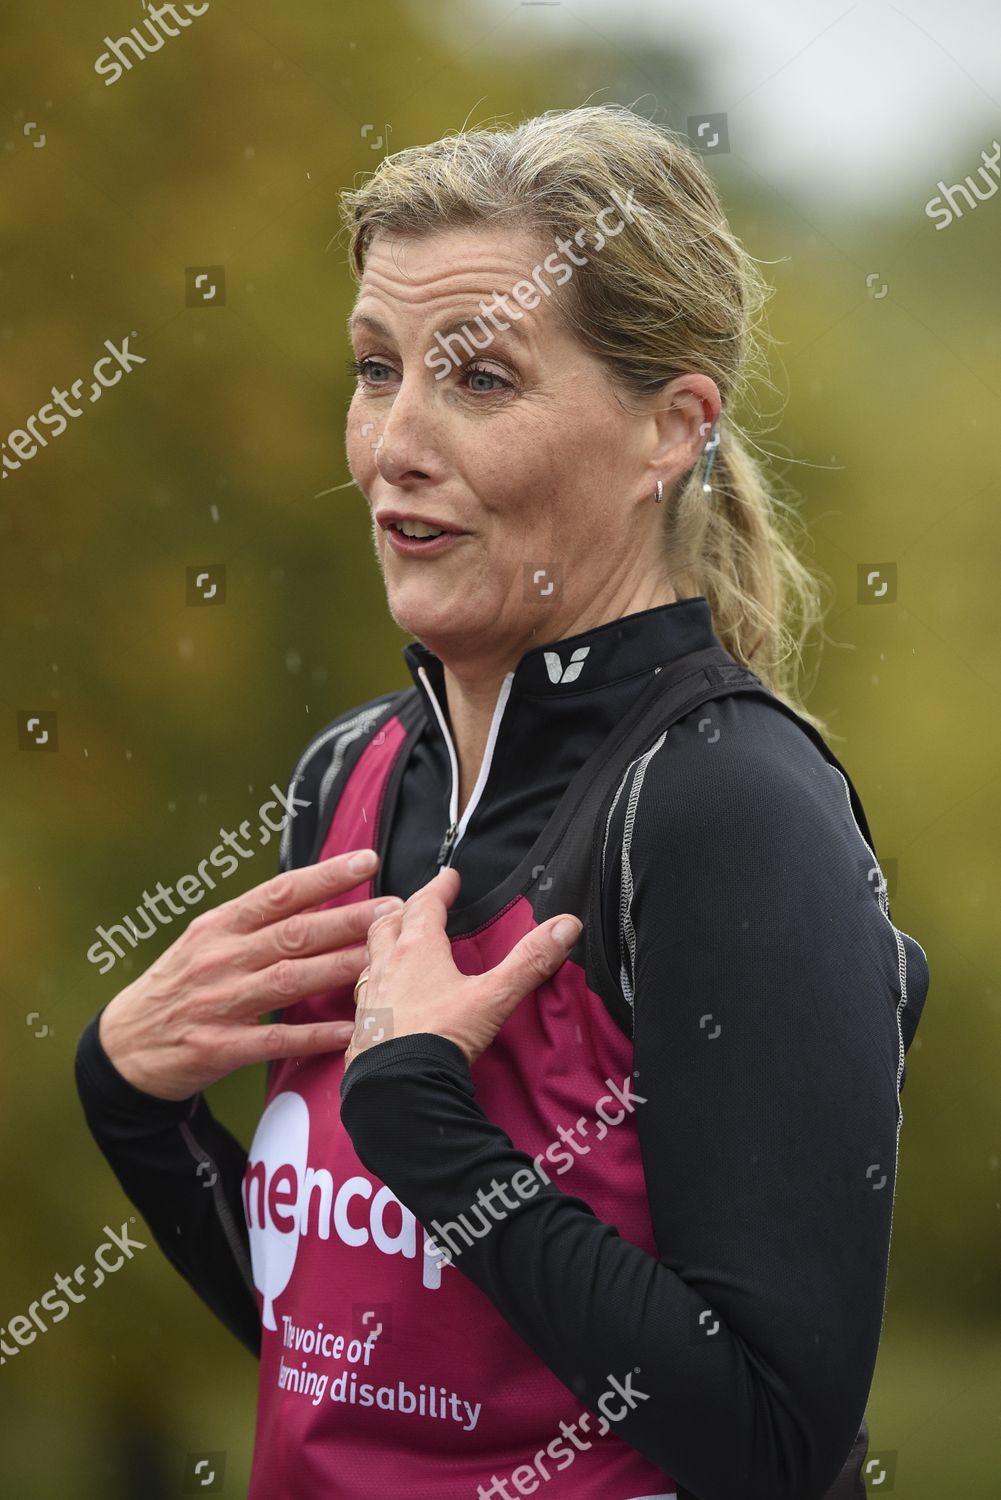 sophie-countess-of-wessex-joins-with-mencaps-learning-disability-running-team-windsor-uk-shutterstock-editorial-10876999u.jpg